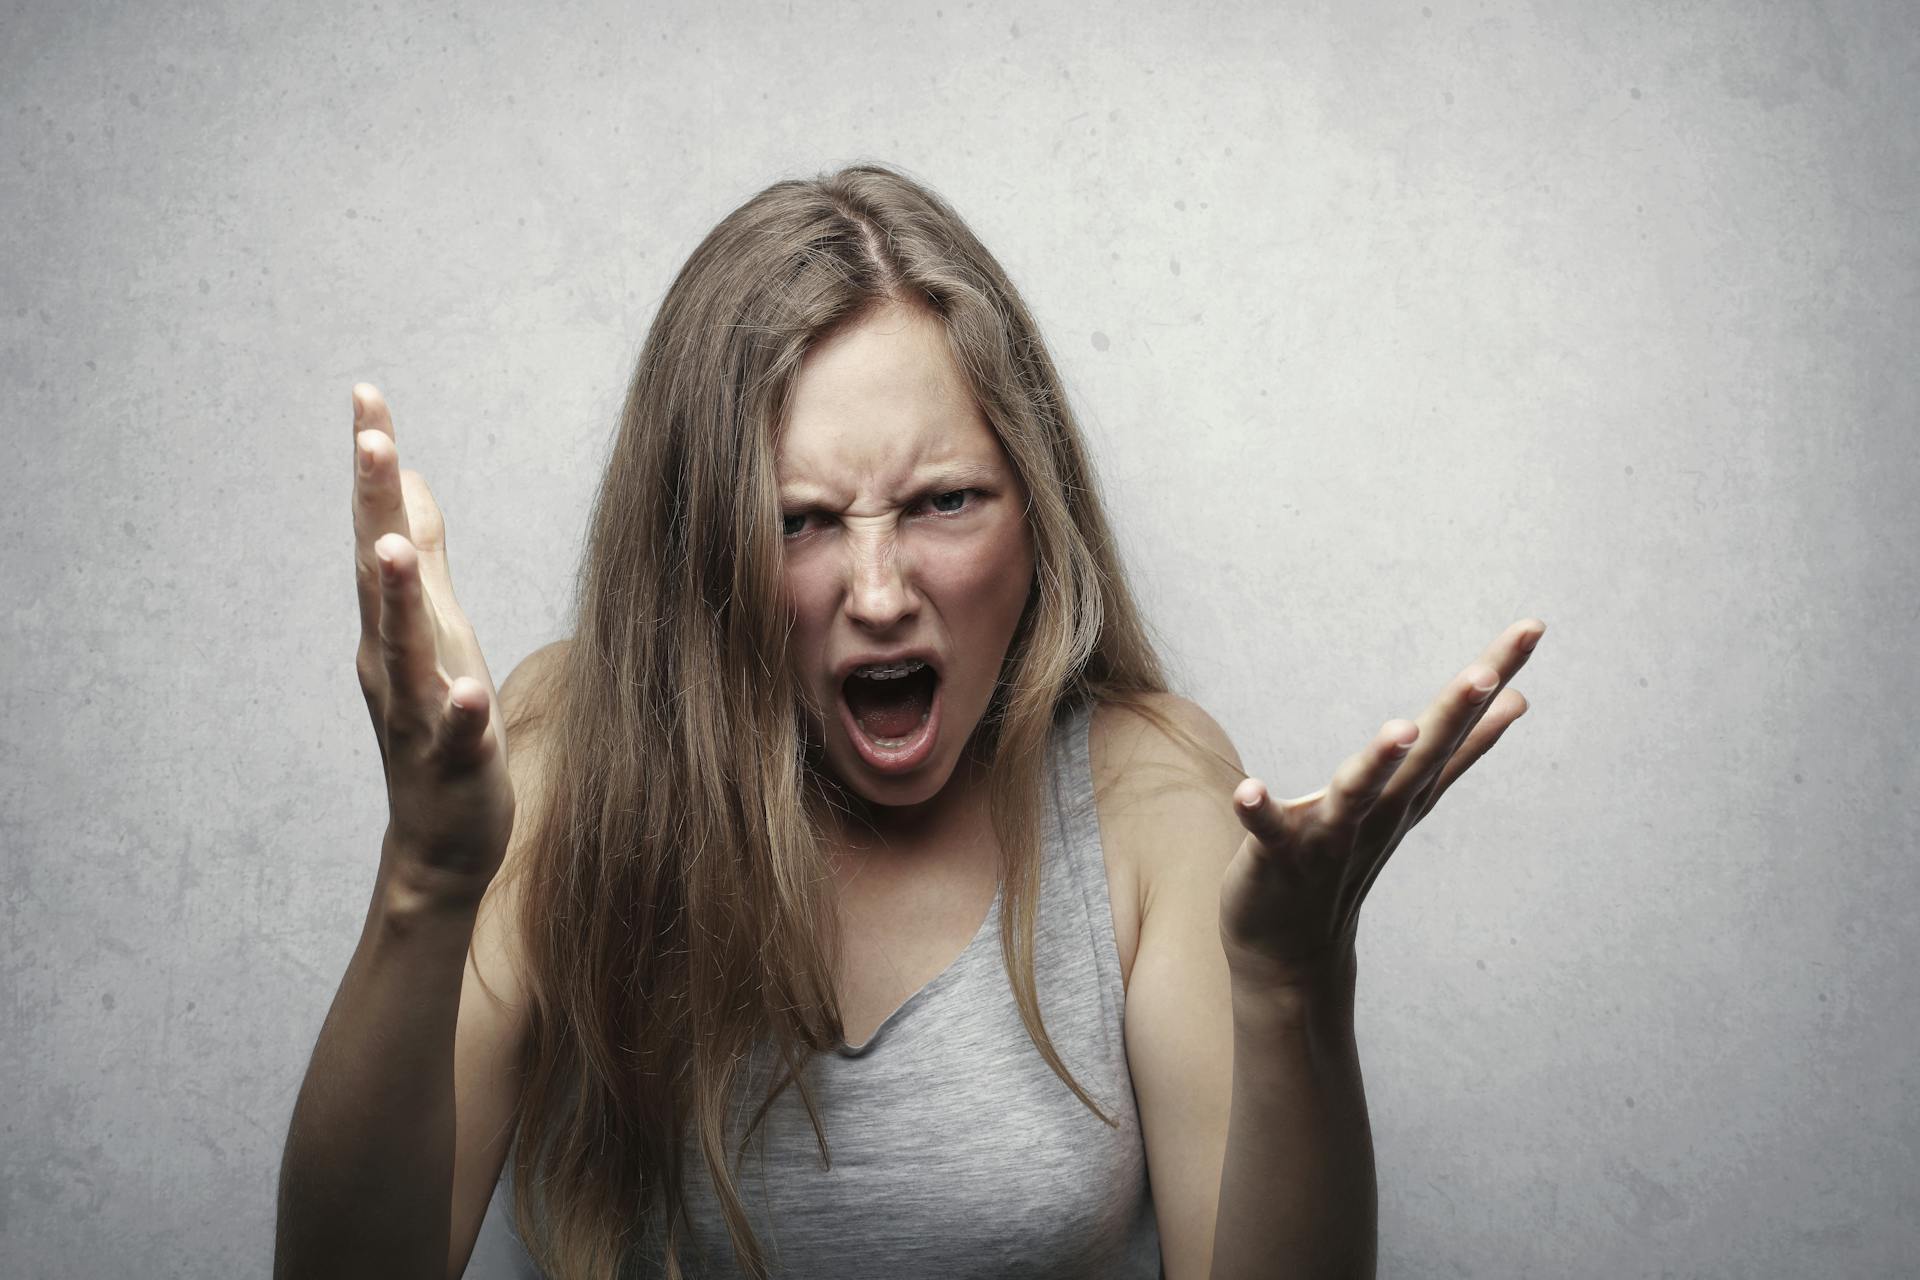 An angry woman screaming | Source: Pexels